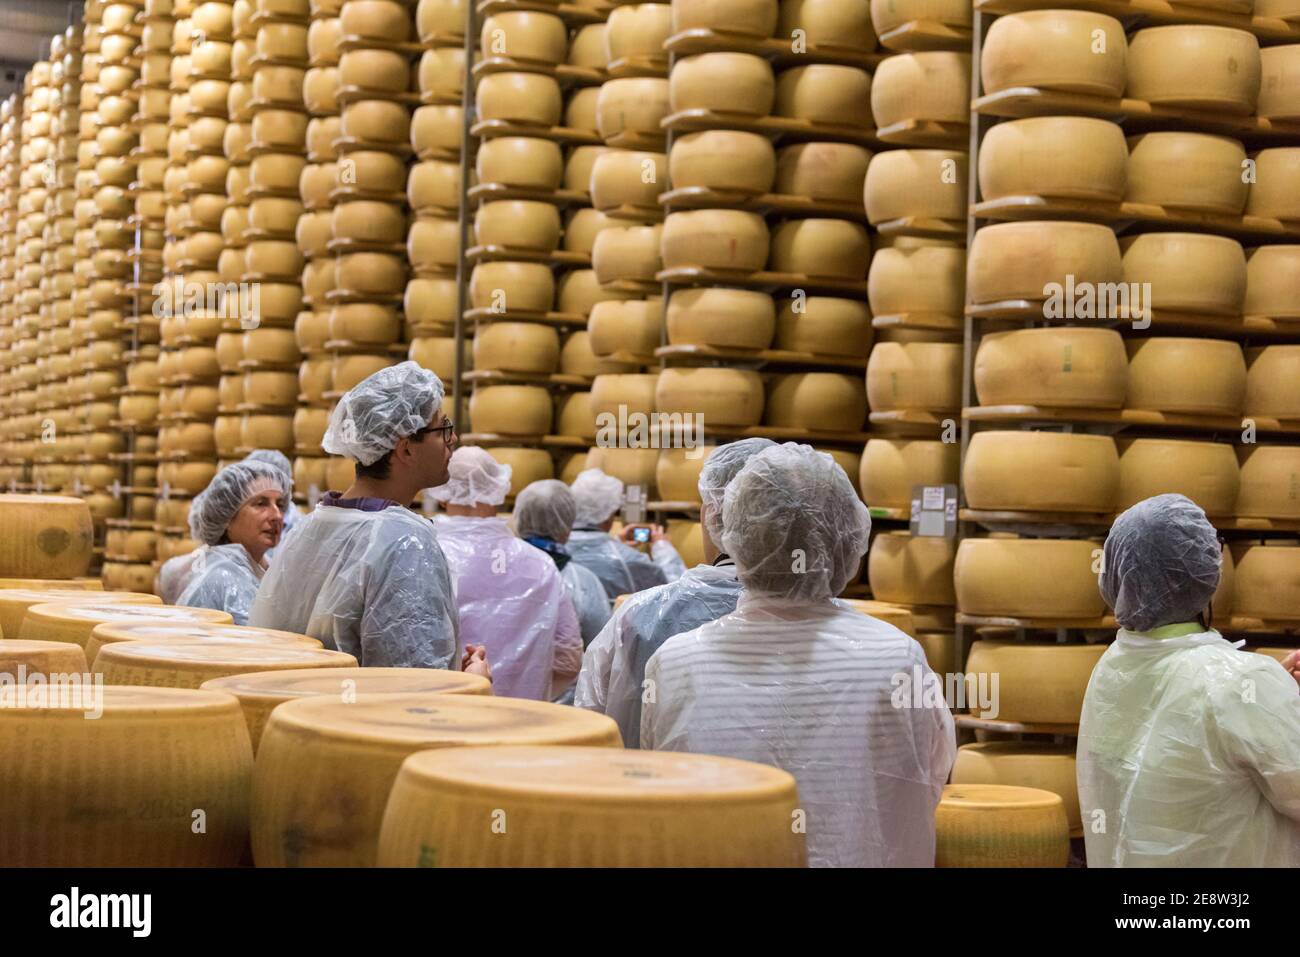 https://c8.alamy.com/comp/2E8W3J2/people-on-a-tourist-visit-to-parmigiana-cheese-factory-look-at-piles-of-stacked-parmesan-cheese-wheels-in-a-factory-near-bologna-2E8W3J2.jpg